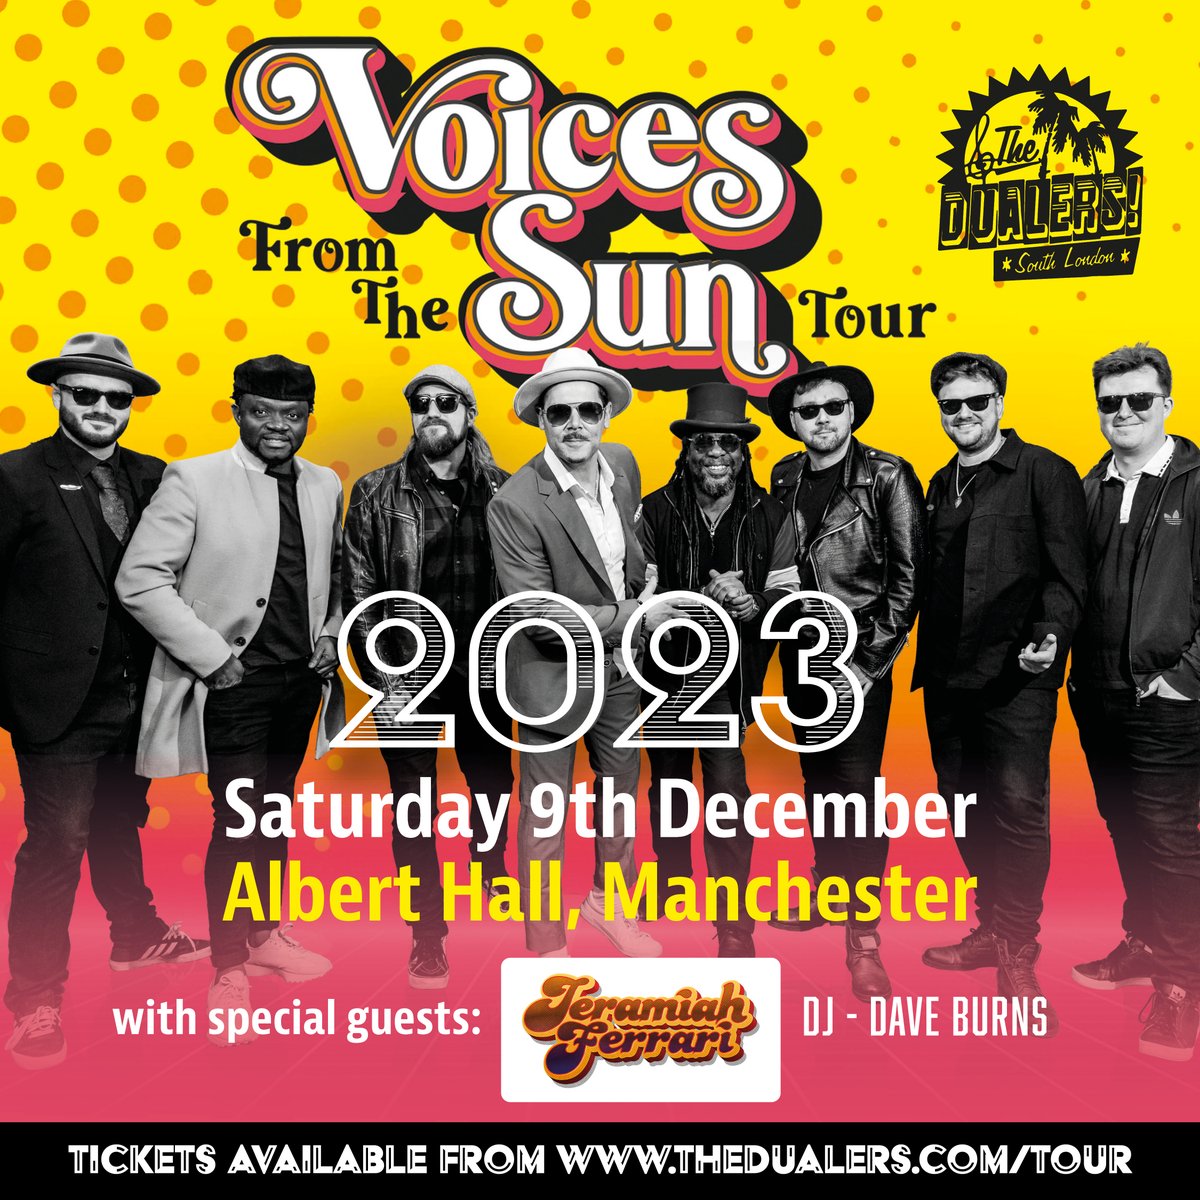 End the year in style by joining us in Manchester on 9th December for an unmissable night of live music! Tickets are selling fast, so don't miss out! Book now: ow.ly/1f6Q50PIJYG